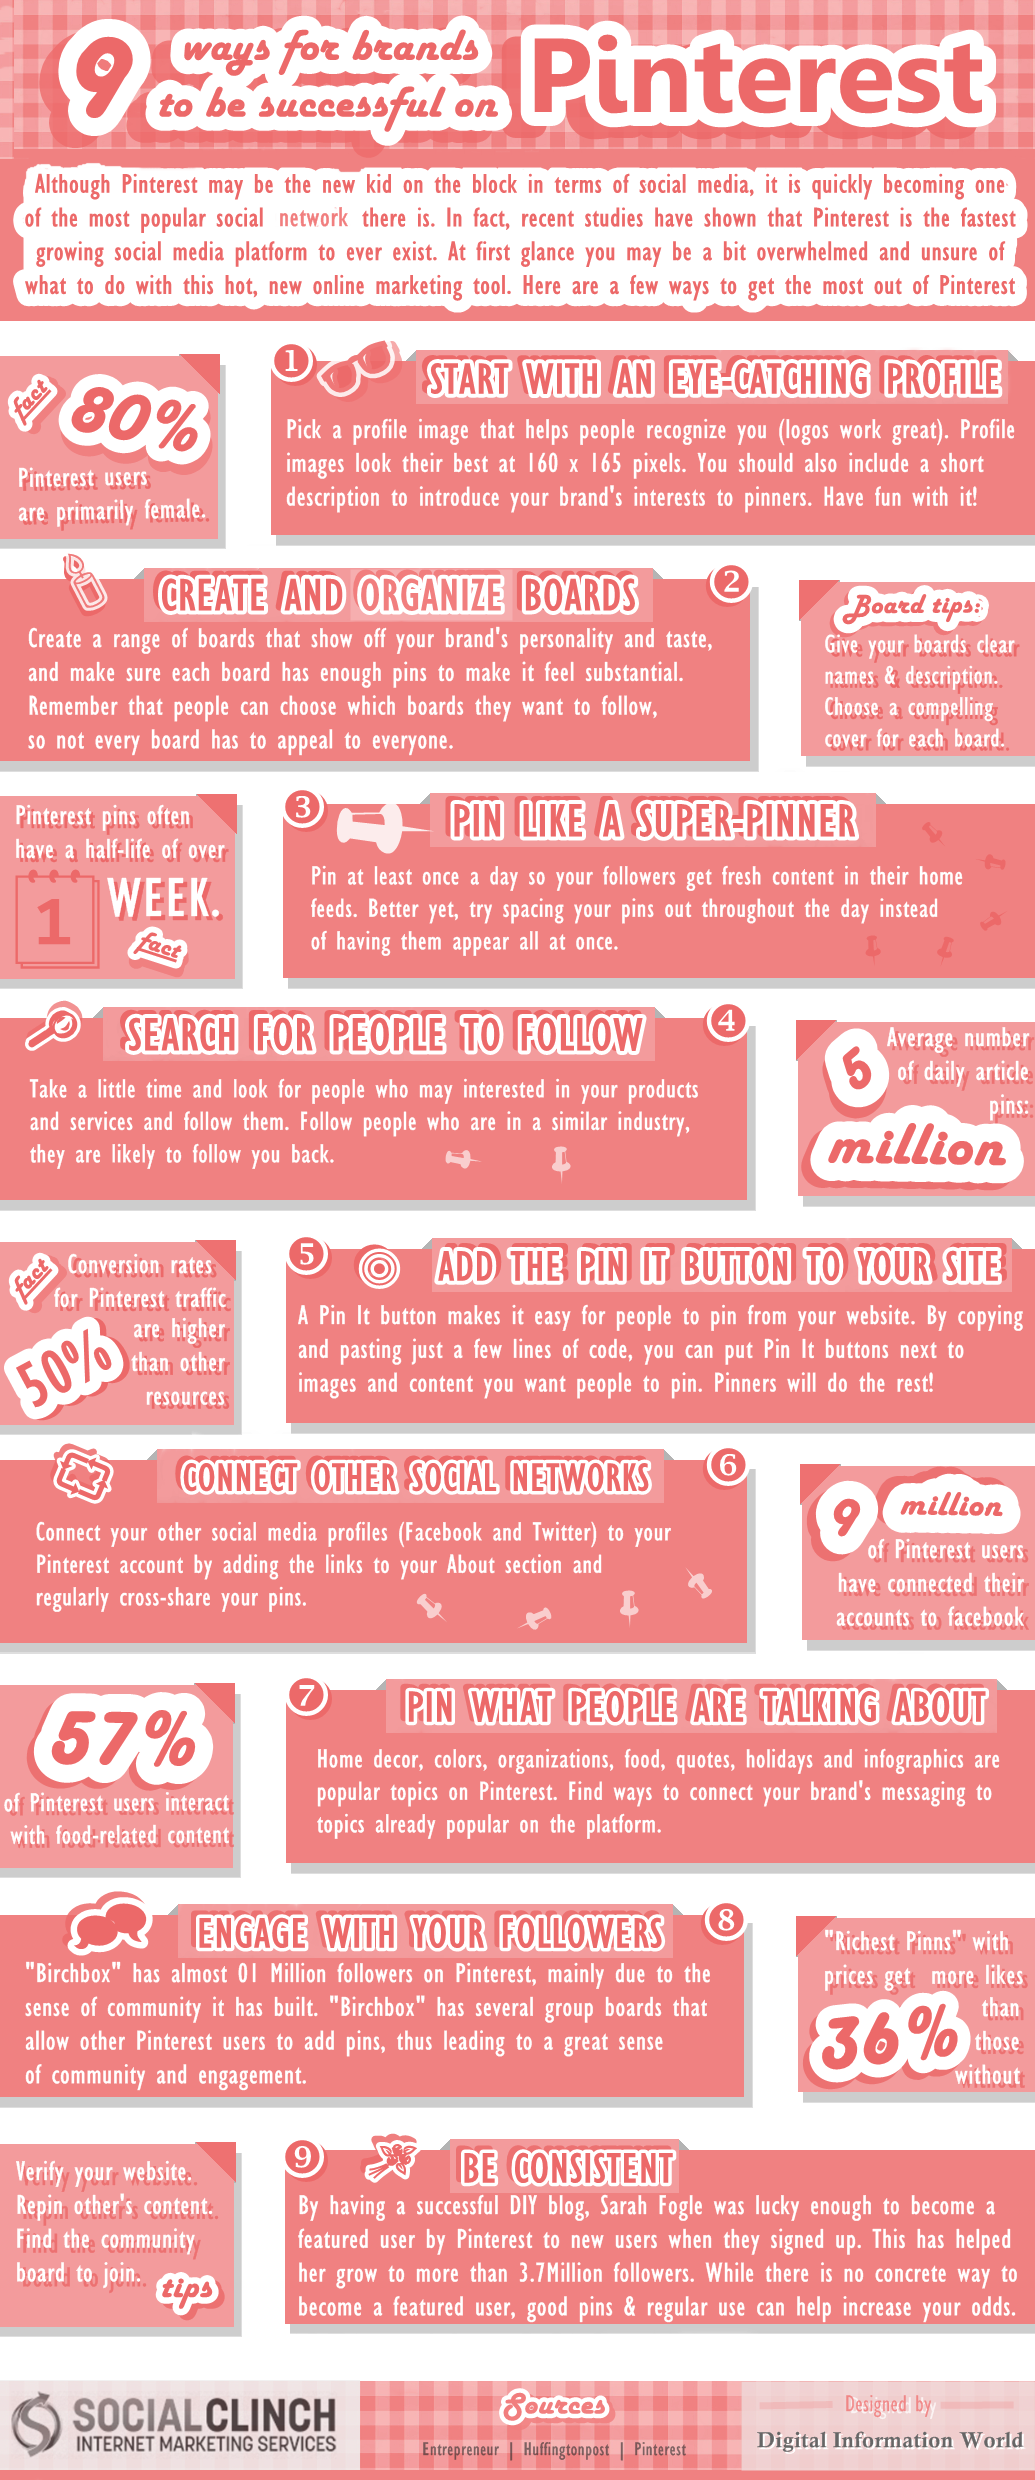 9 Ways for Brands to be Successful on Pinterest [INFOGRAPHIC]